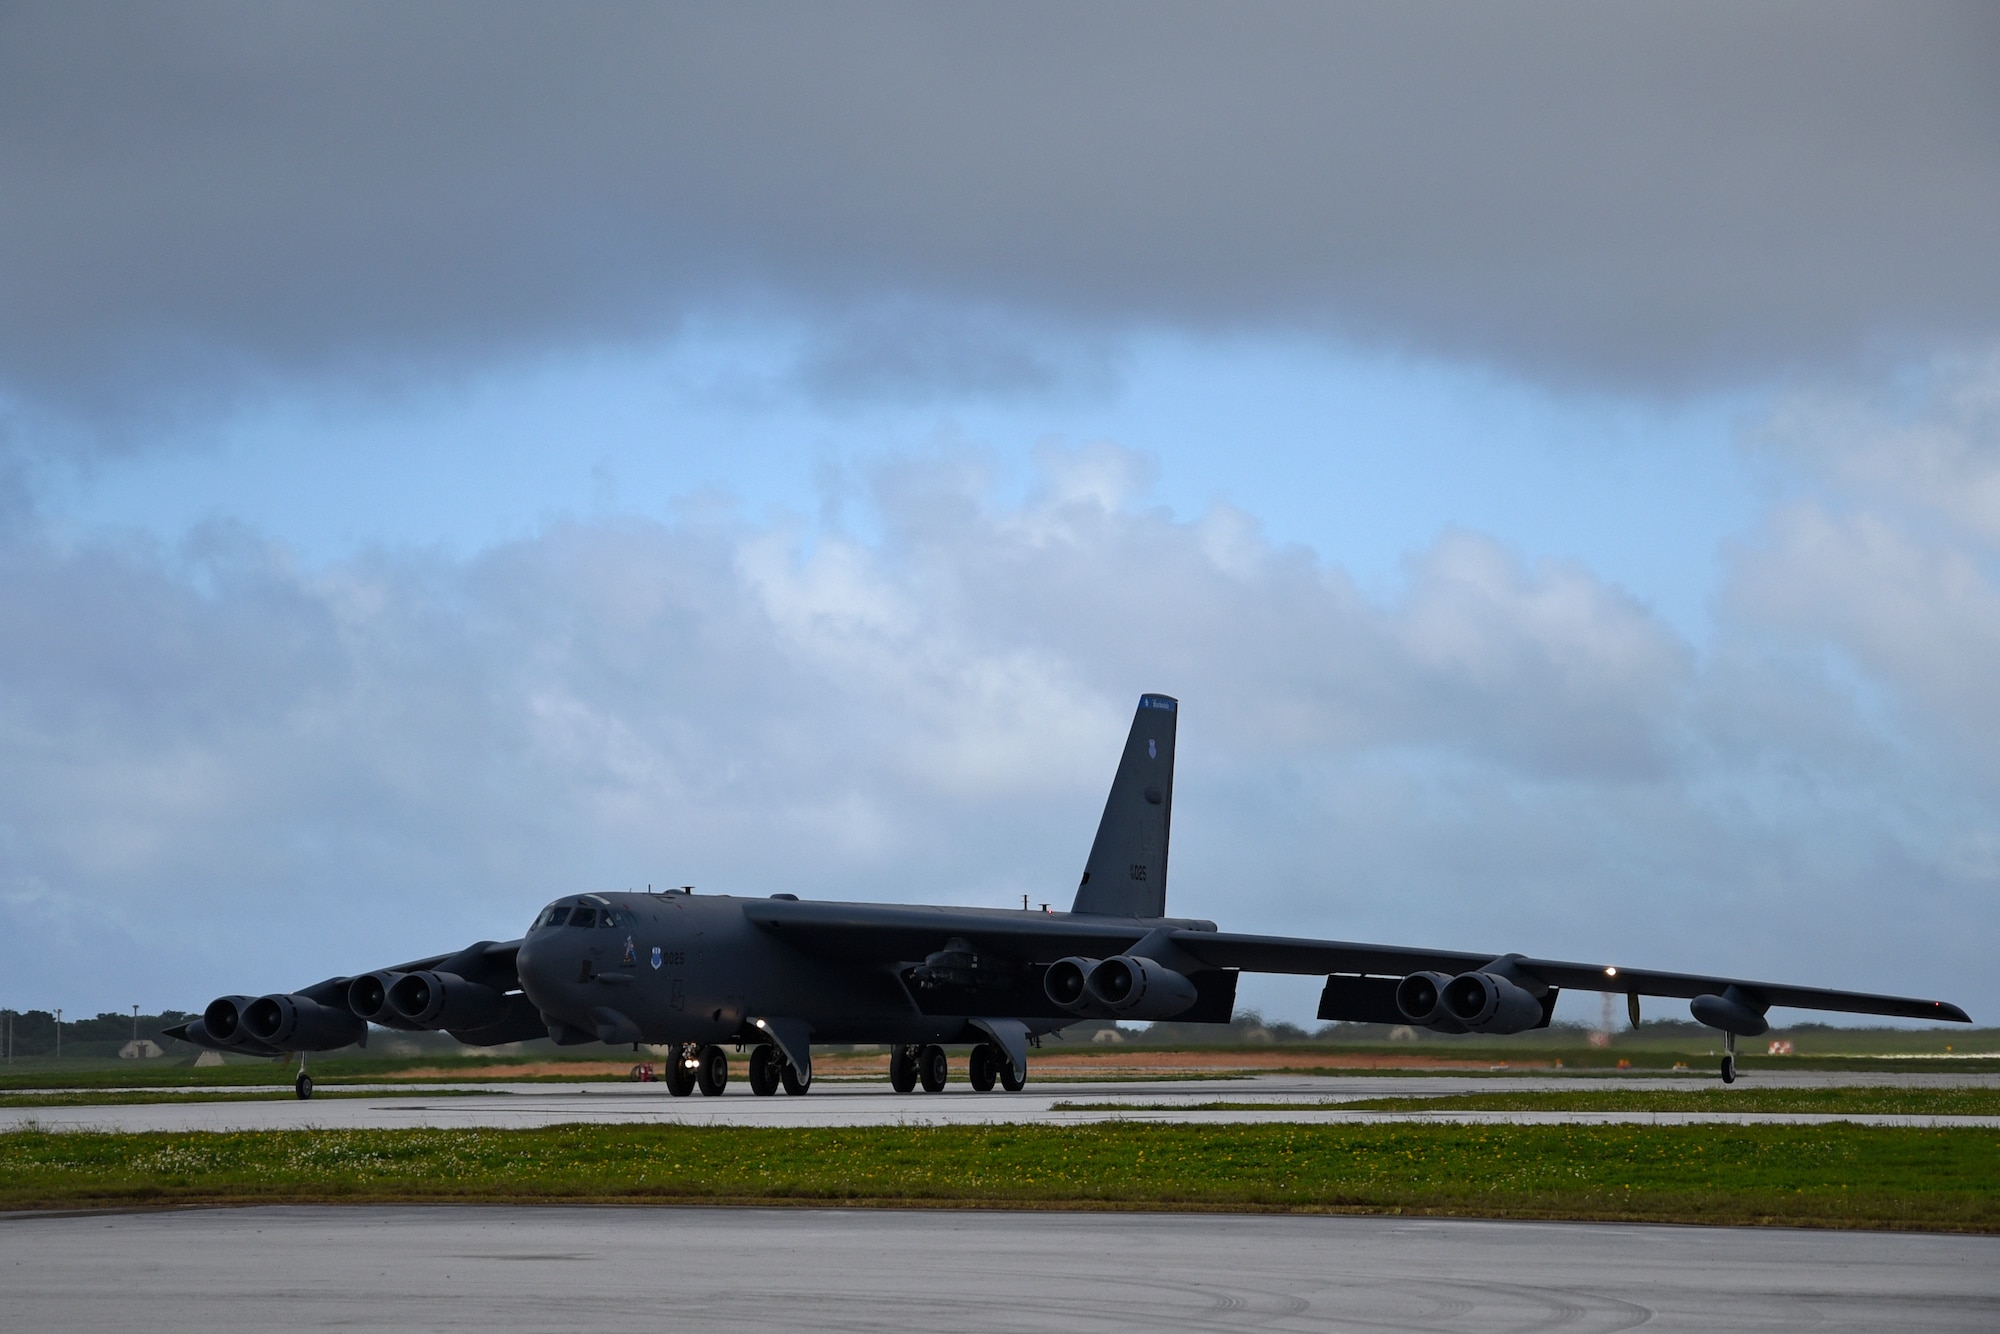 A U.S. Air Force B-52H Stratofortress bomber, deployed from Barksdale Air Force Base, Louisiana, taxis at Andersen Air Force Base, Guam, after conducting a routine training mission May 2, 2018.